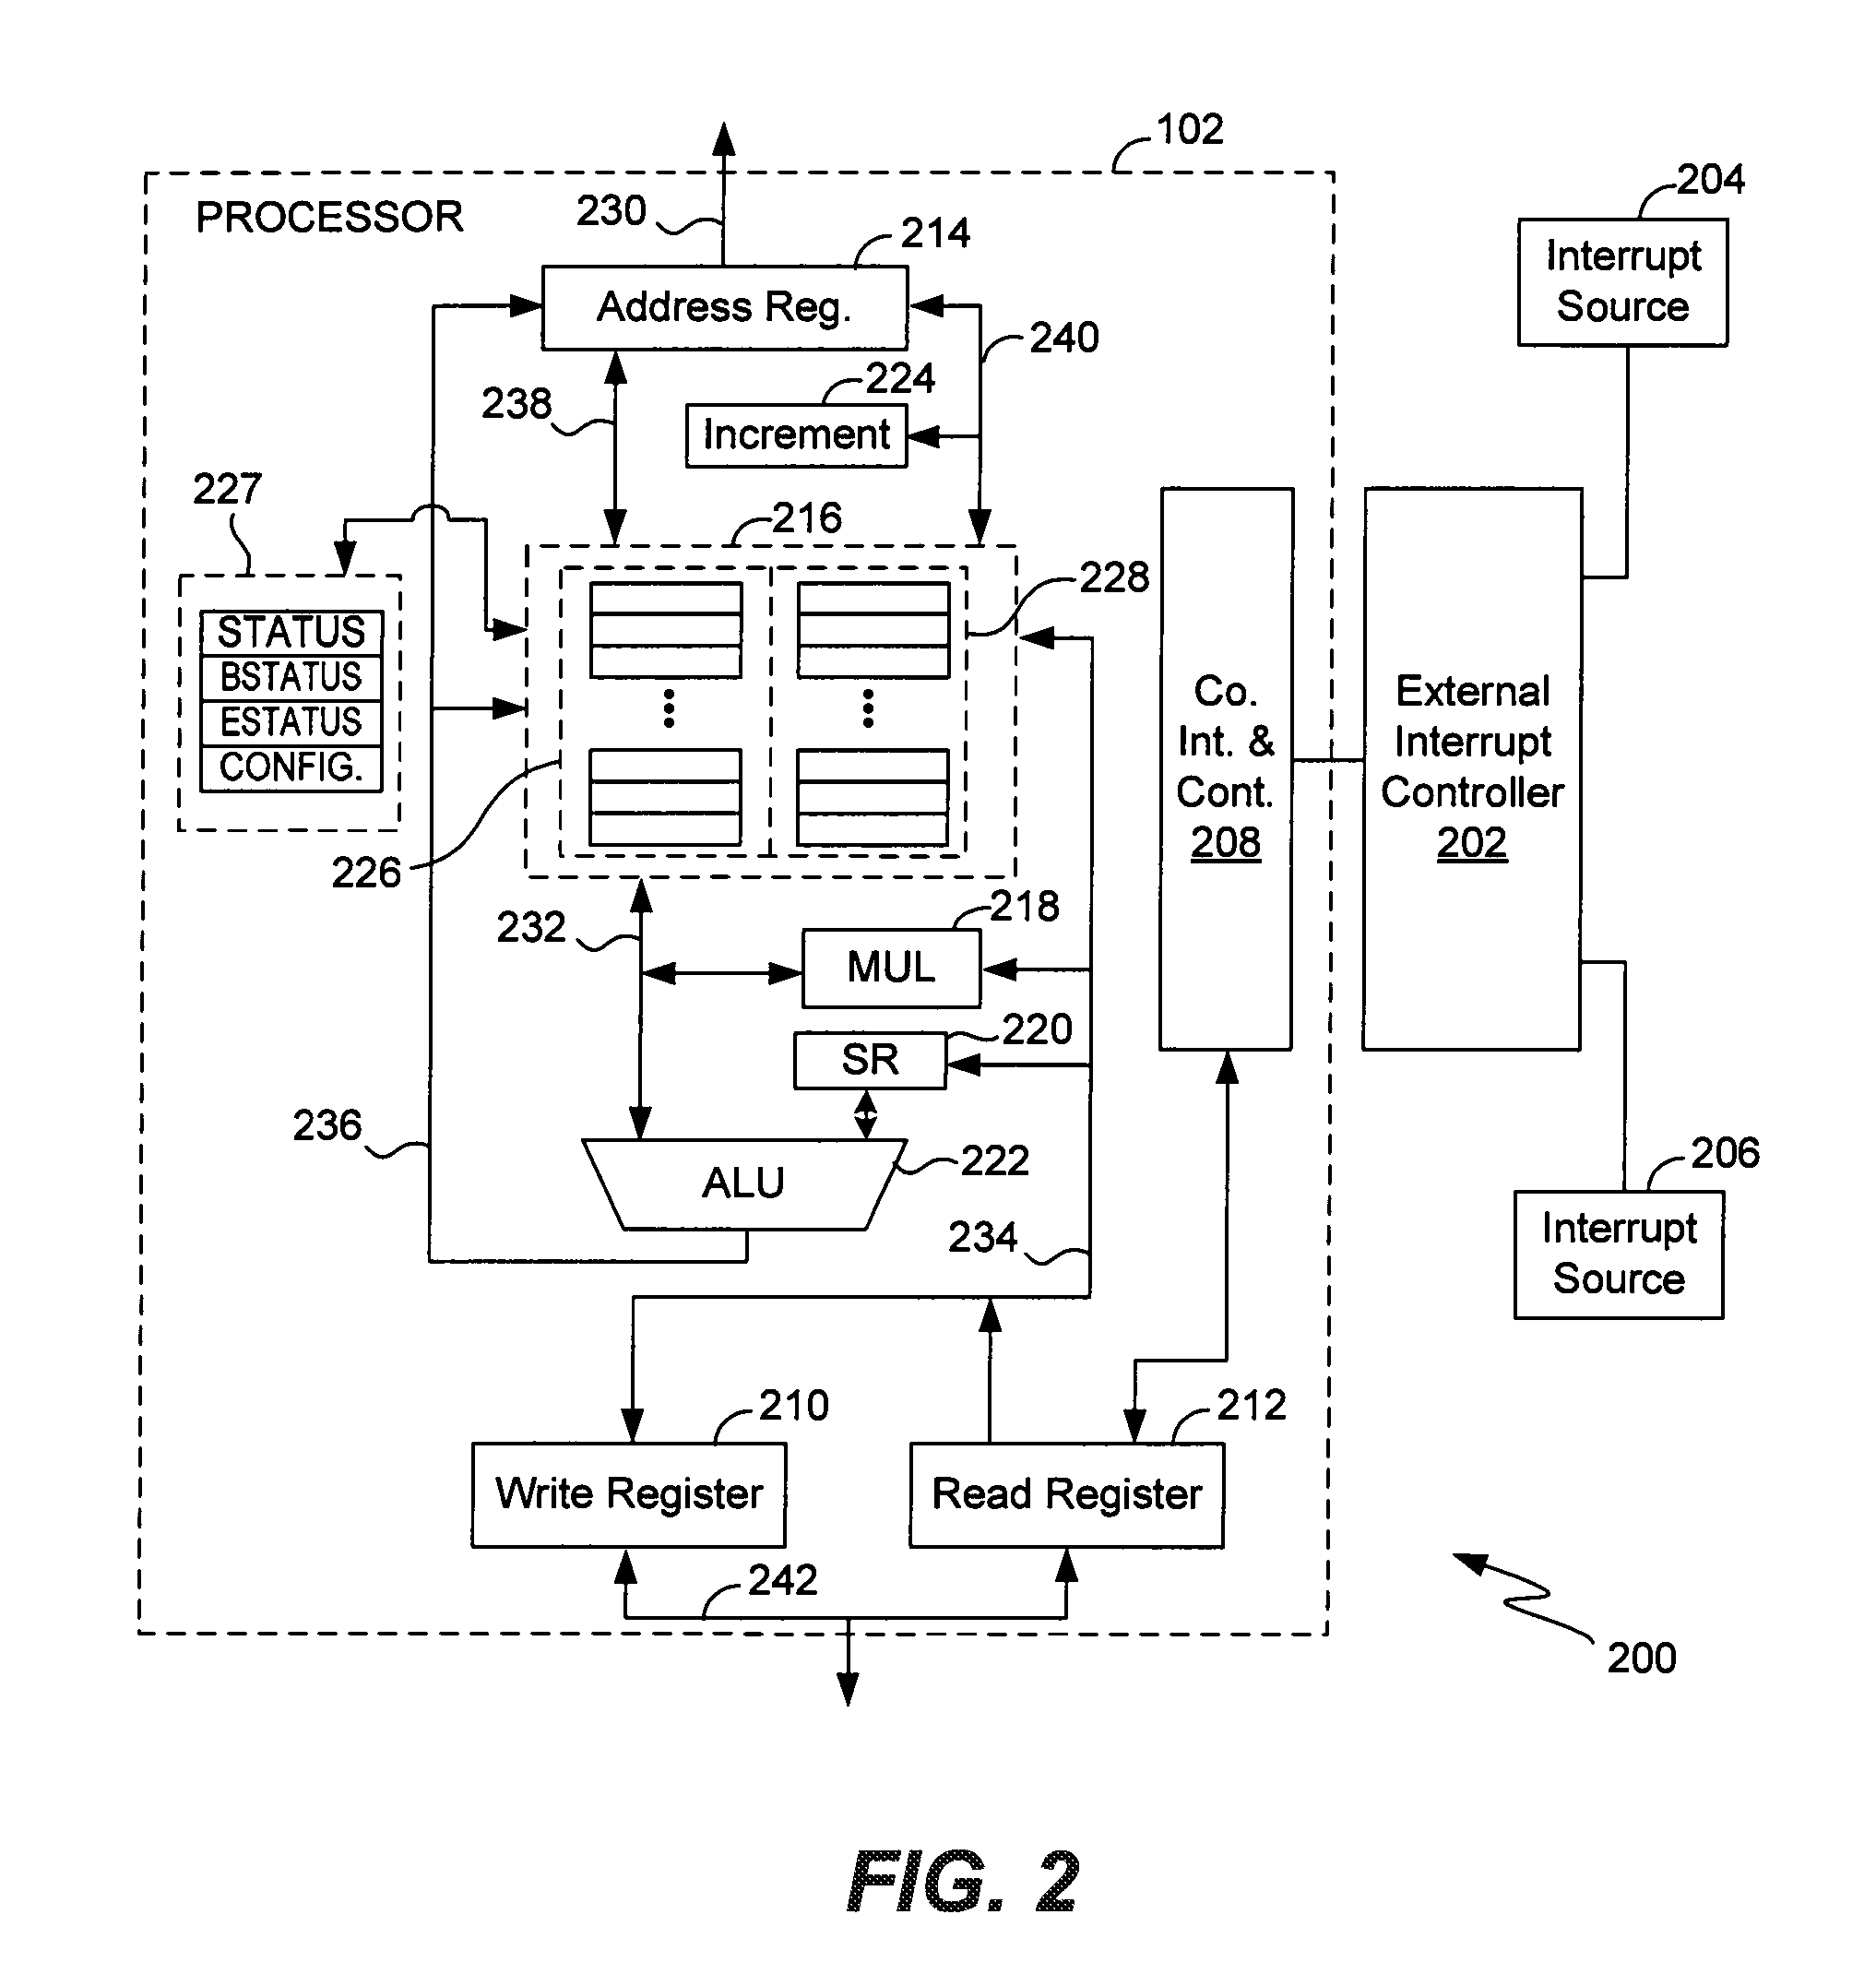 Methods and systems for reducing interrupt latency by using a dedicated bit